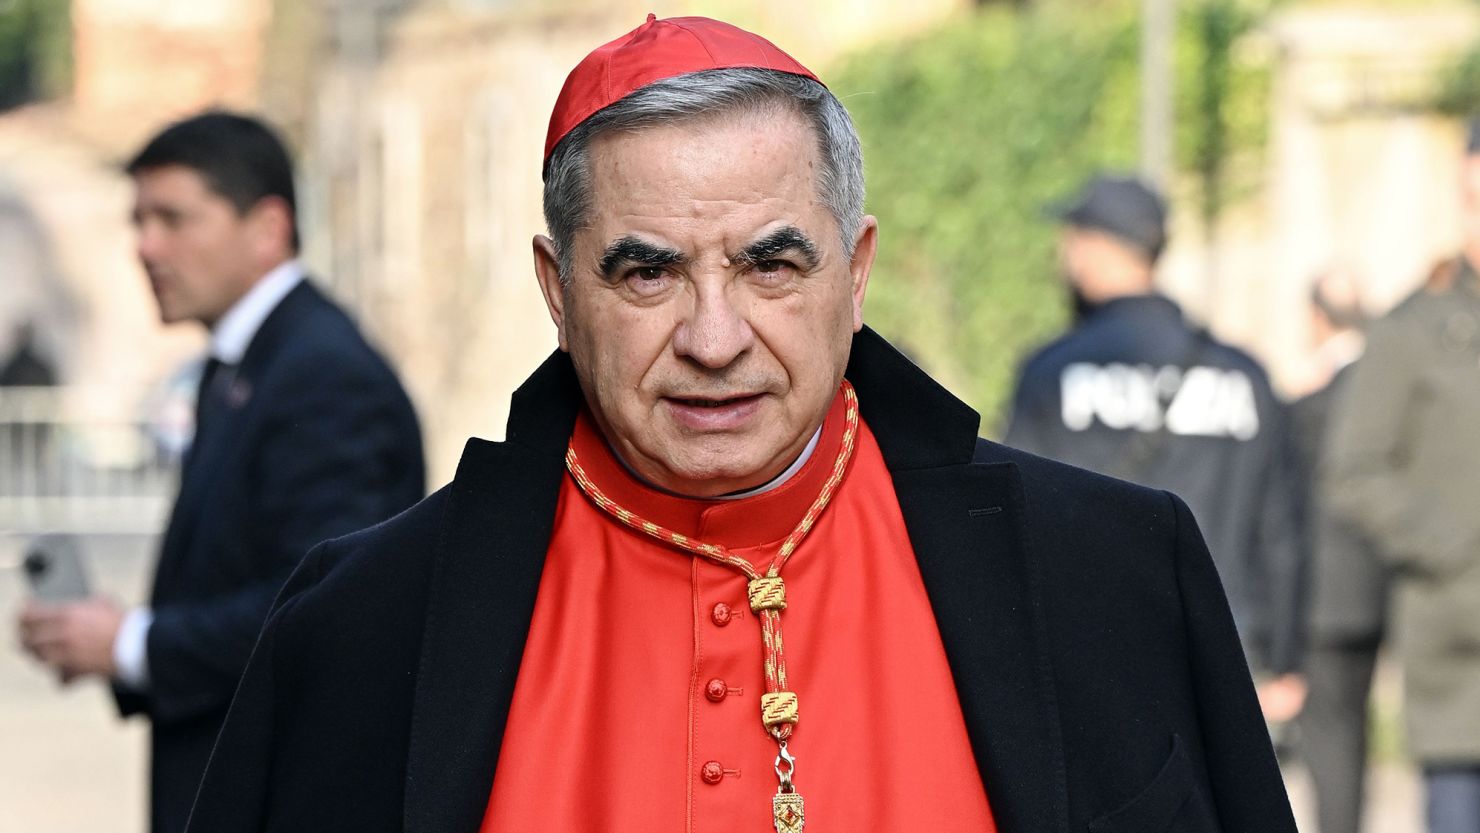 Vatican : A Cardinal’s Conviction and the Appeal for Justice